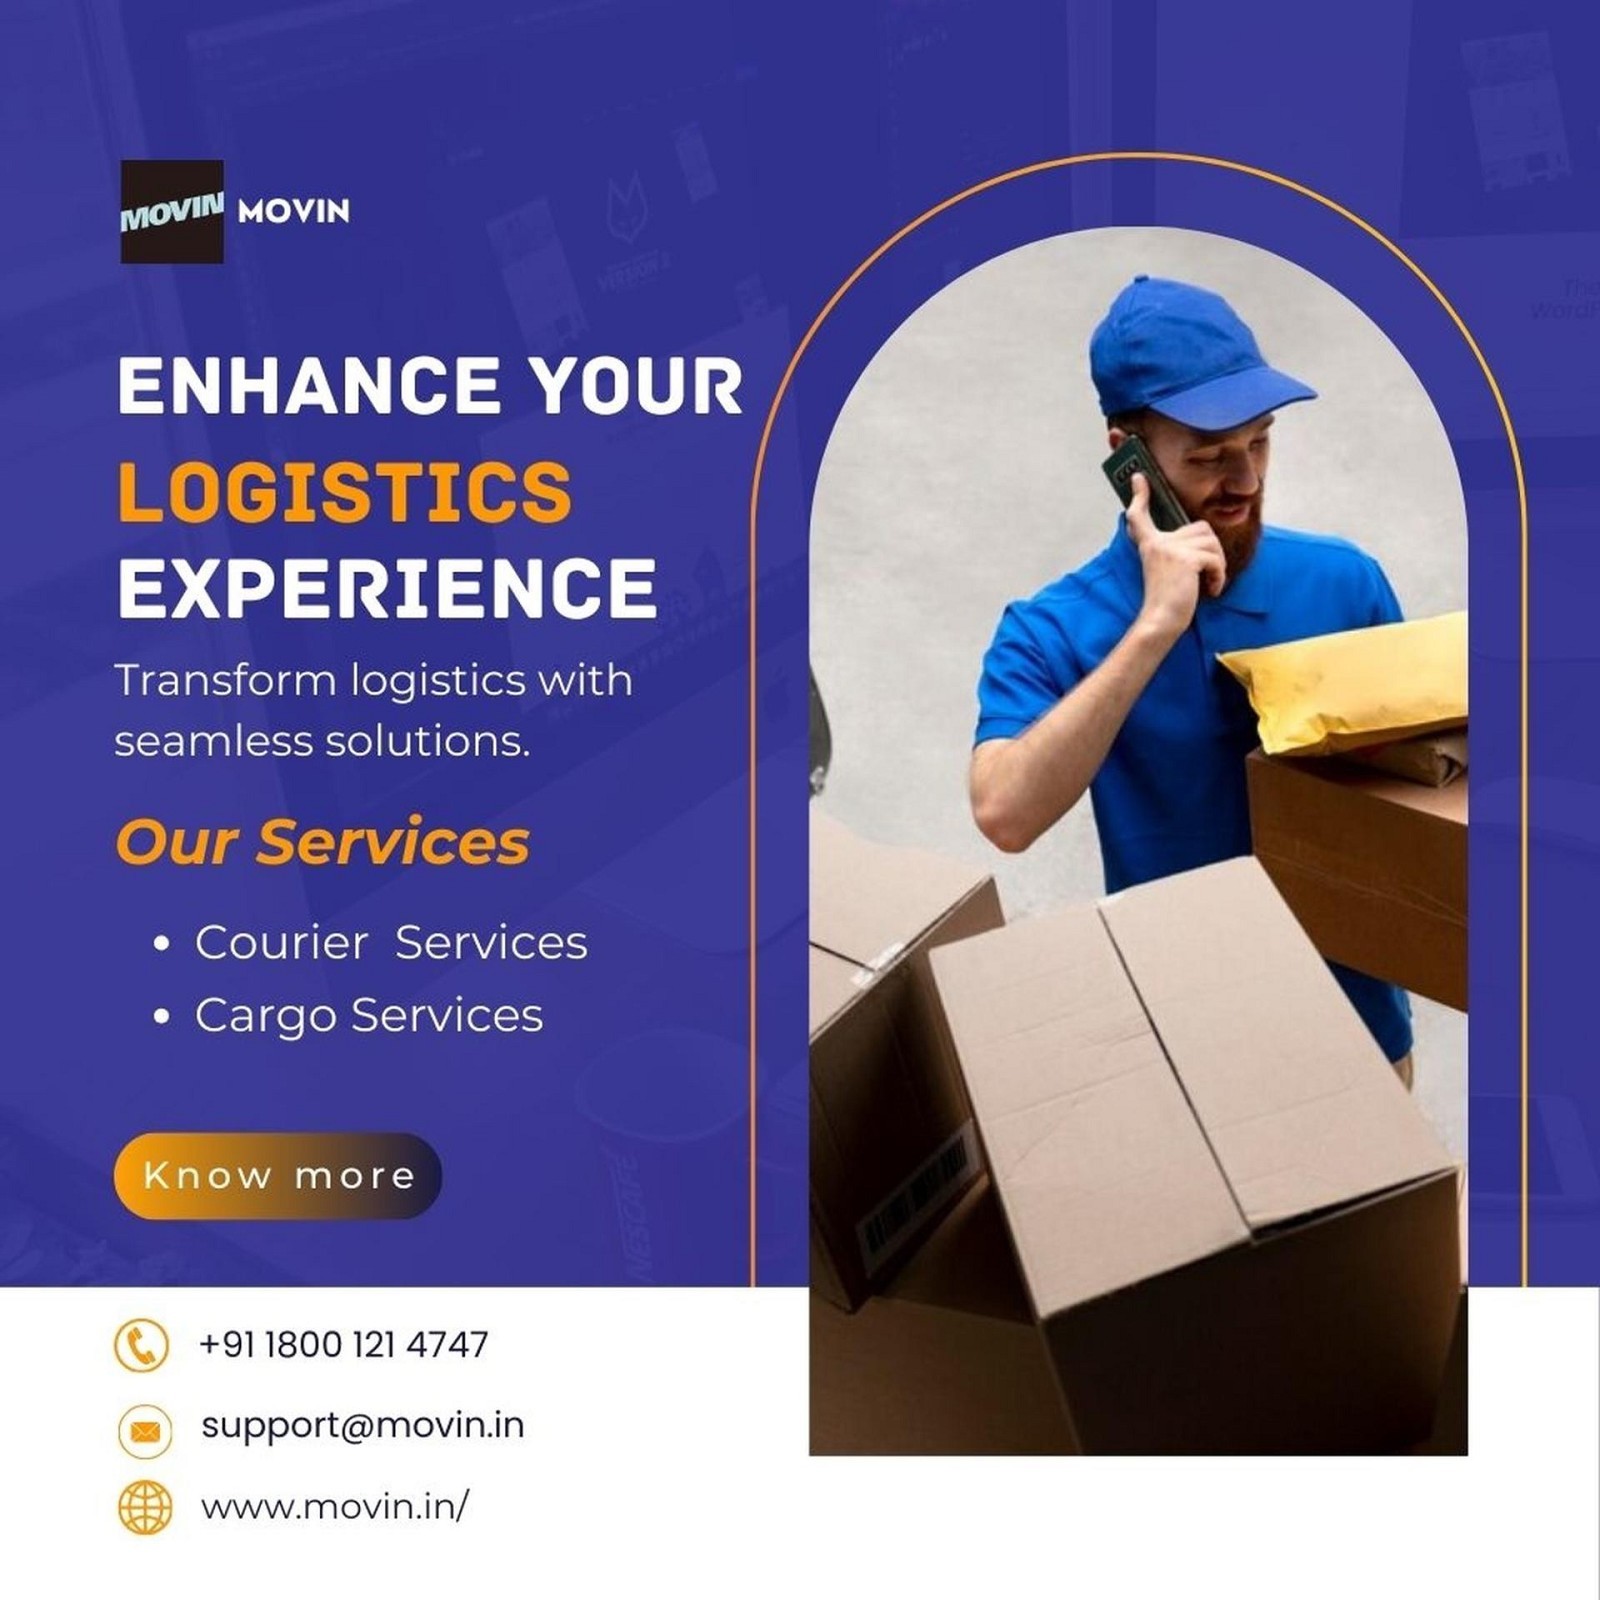 Organize Your Logistics with Movin Tourier and Freight Services